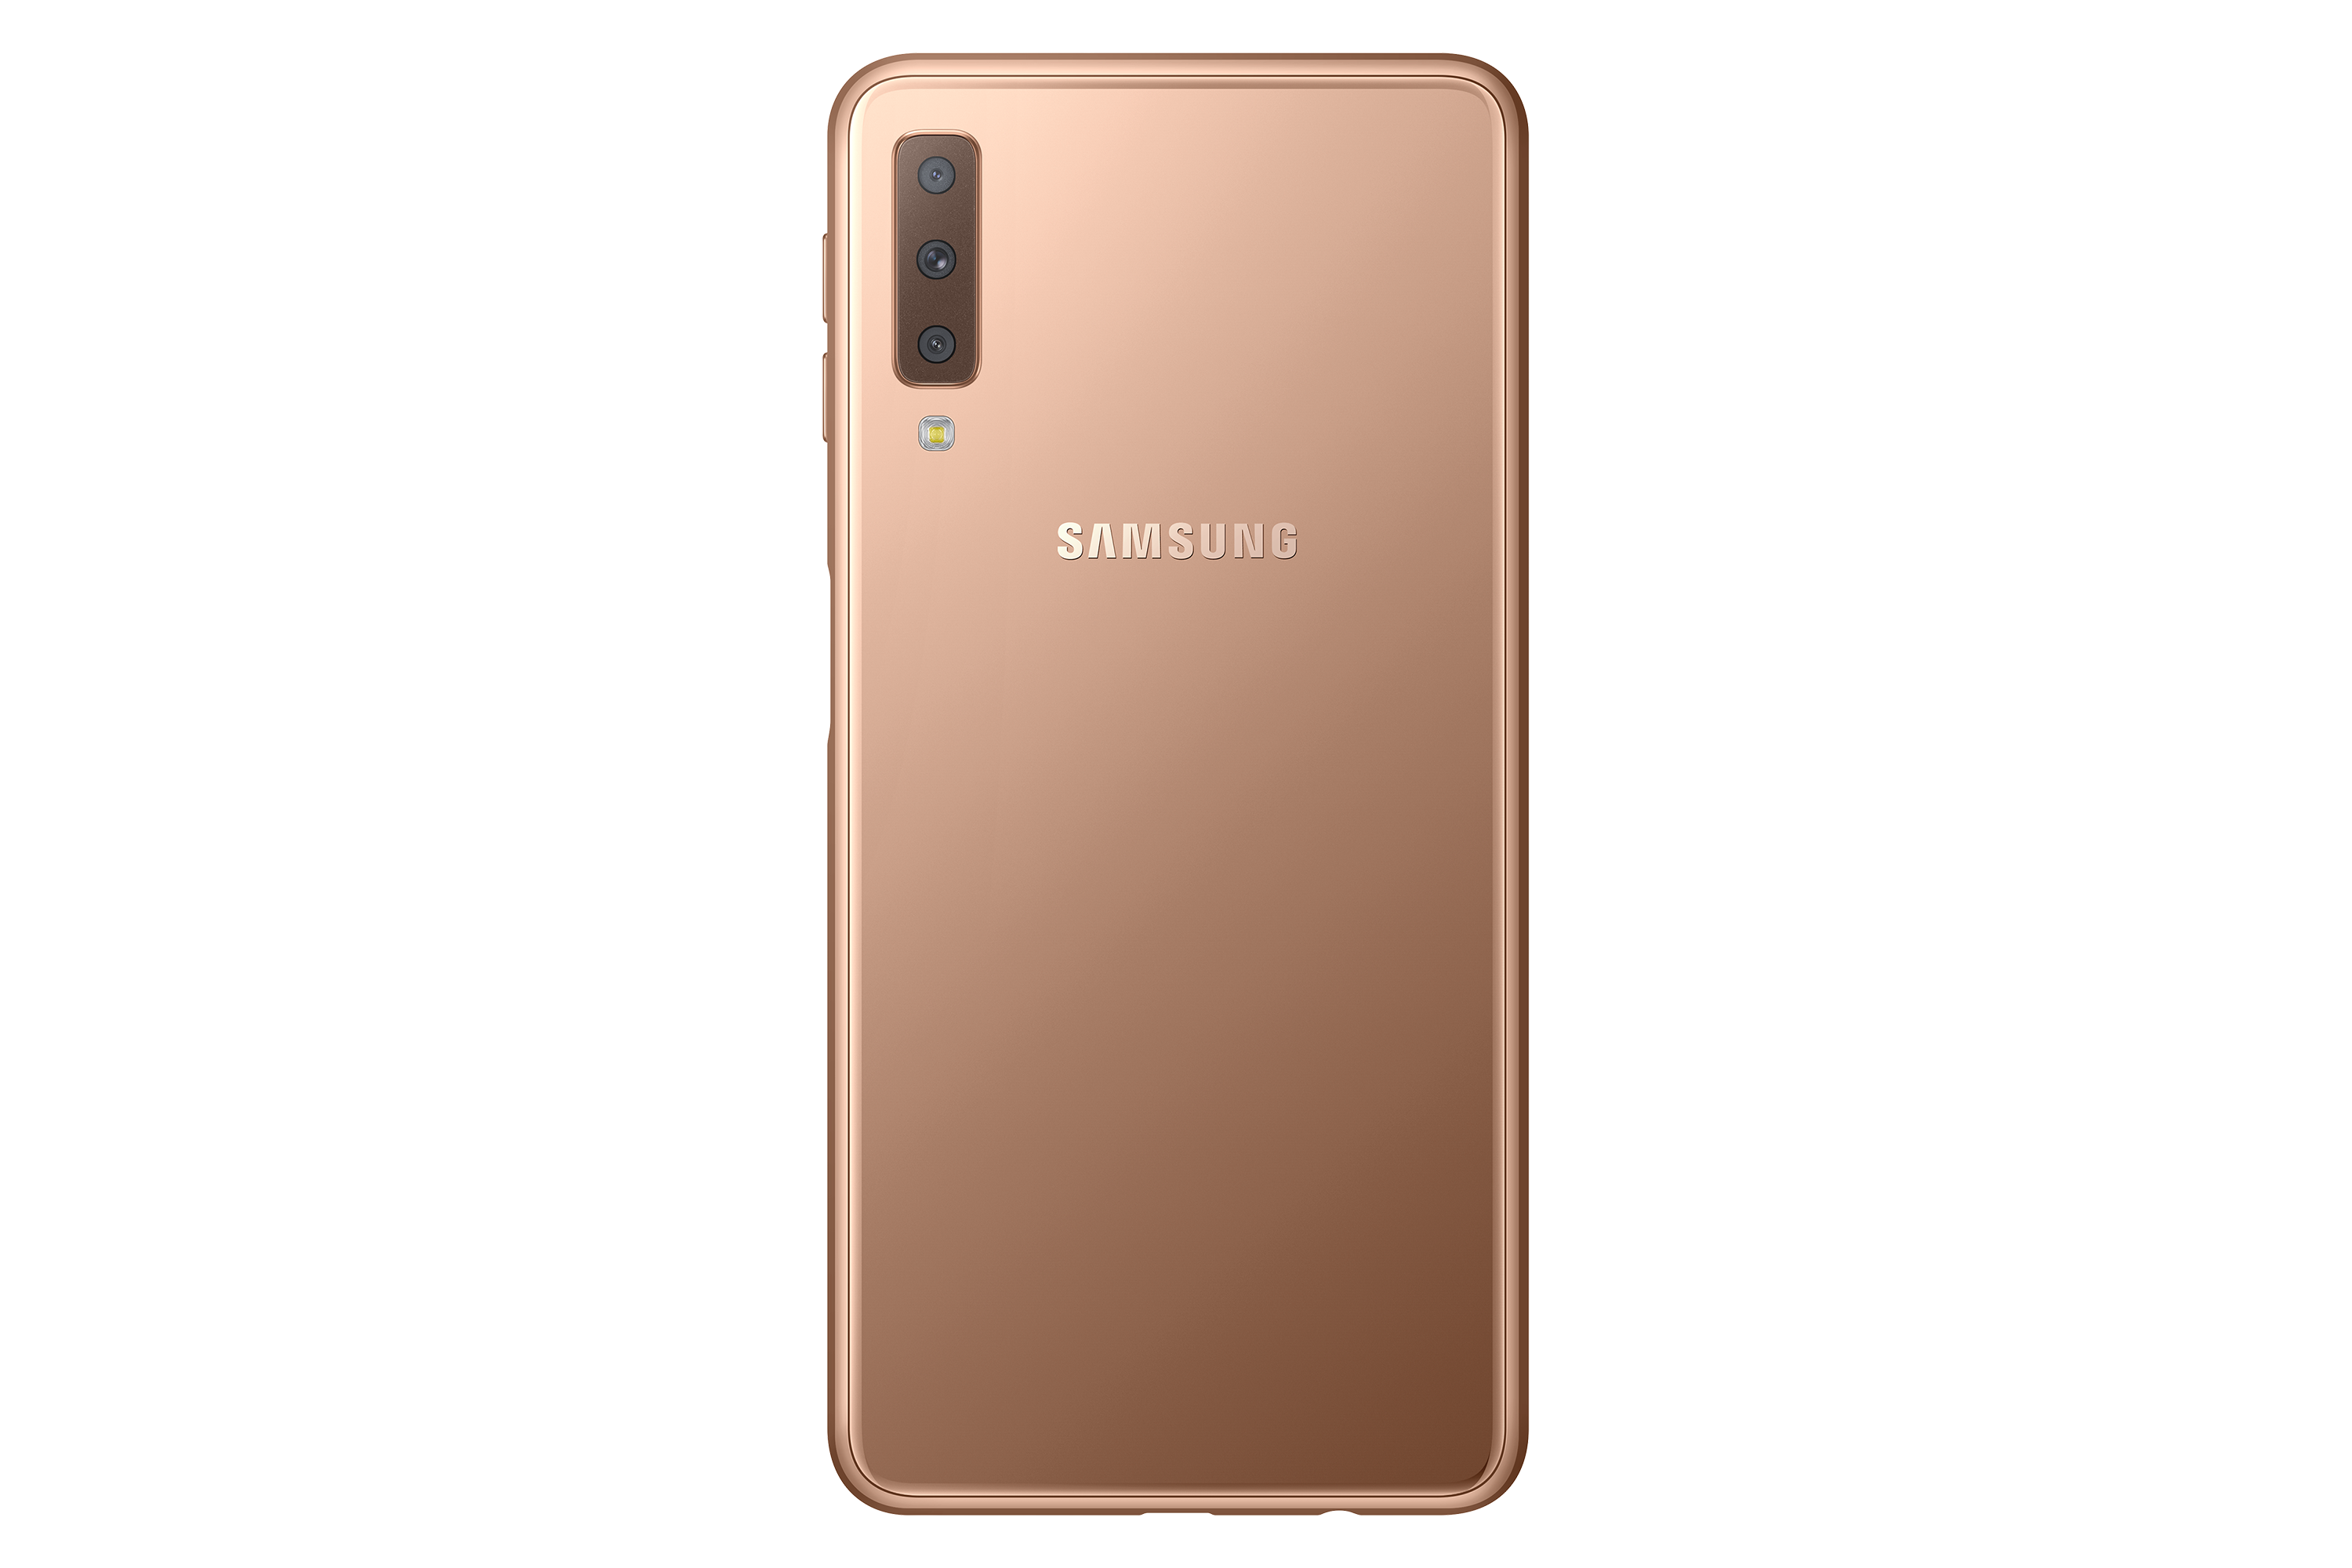 Samsung Galaxy A7 2018 goes official with triple rear cameras  SamMobile